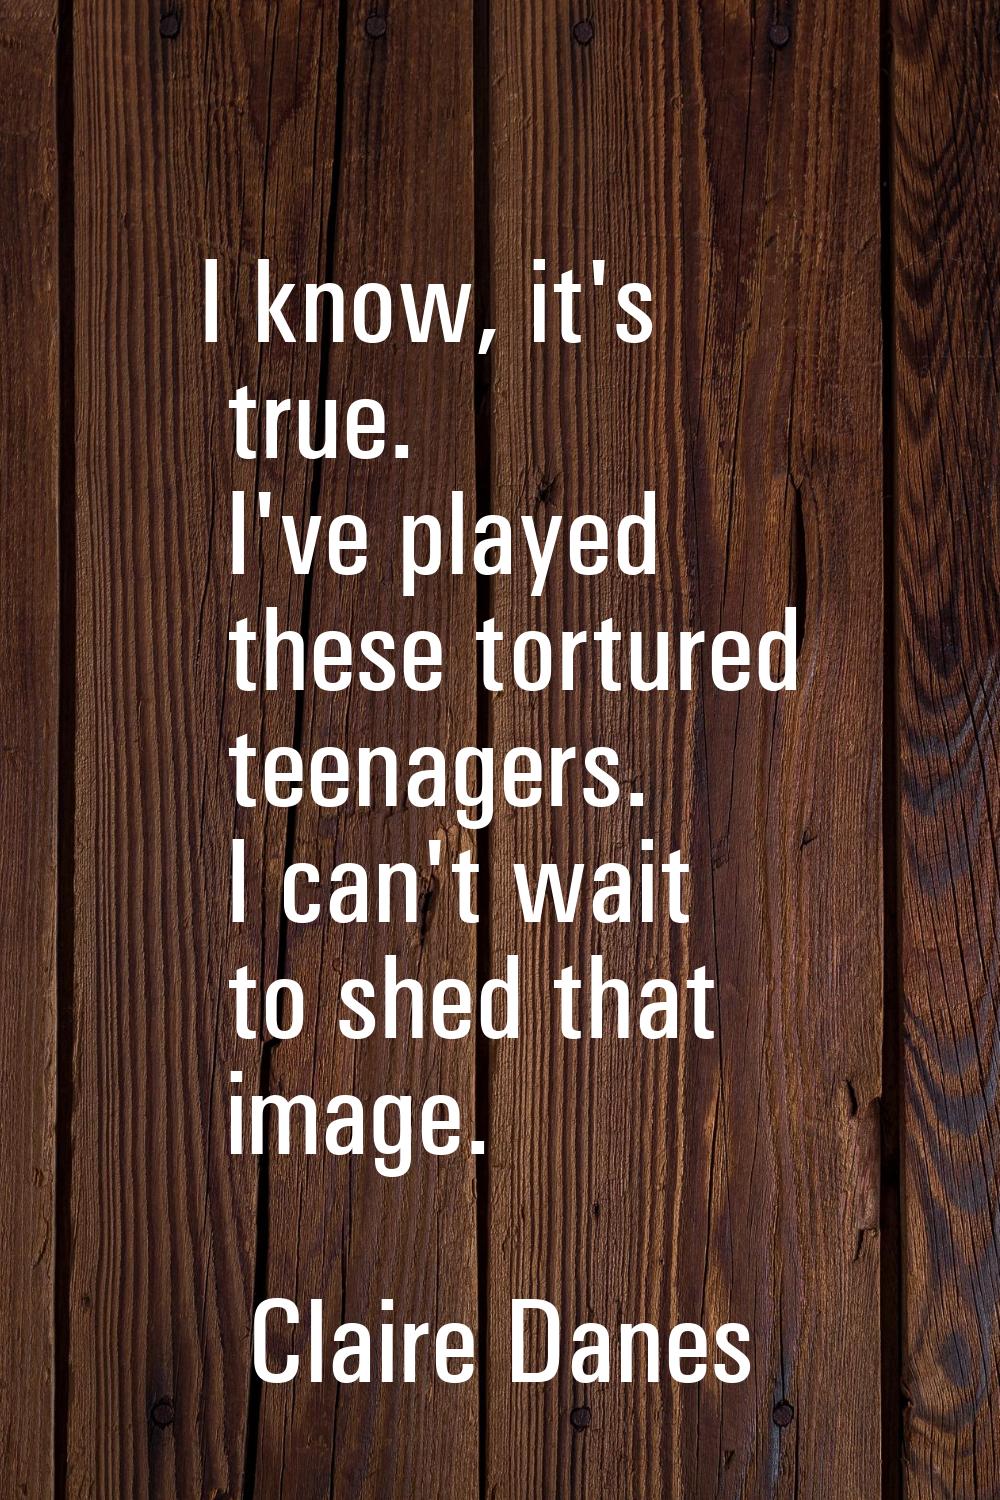 I know, it's true. I've played these tortured teenagers. I can't wait to shed that image.